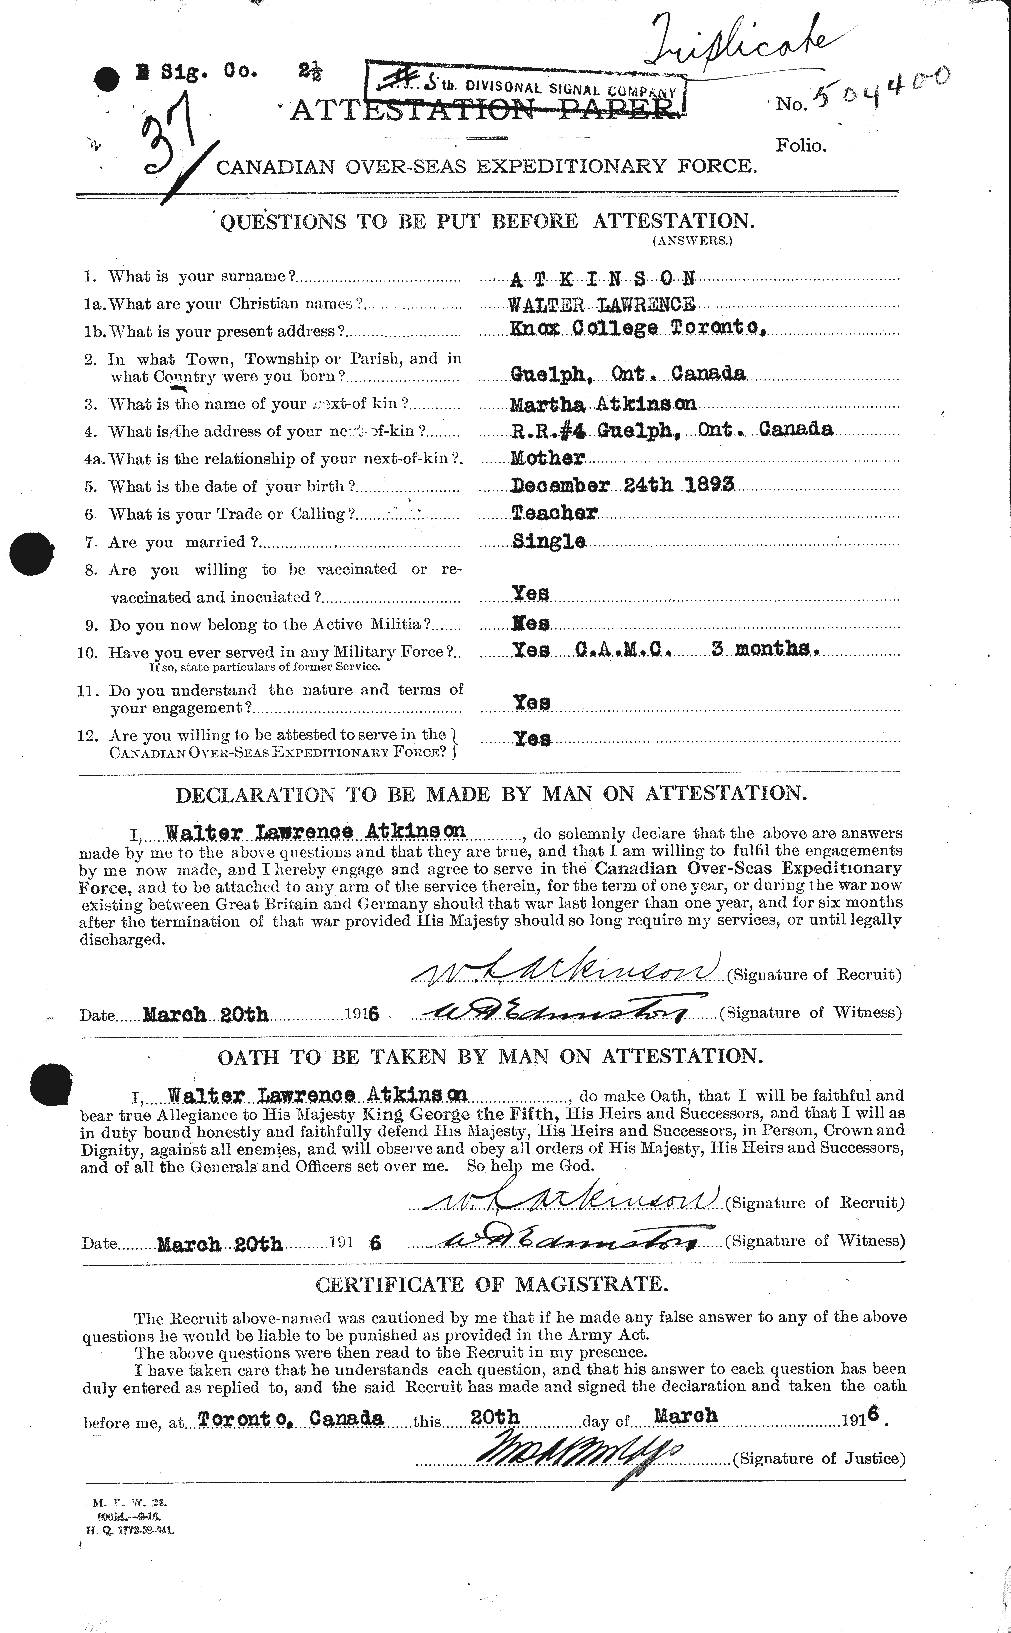 Personnel Records of the First World War - CEF 224229a